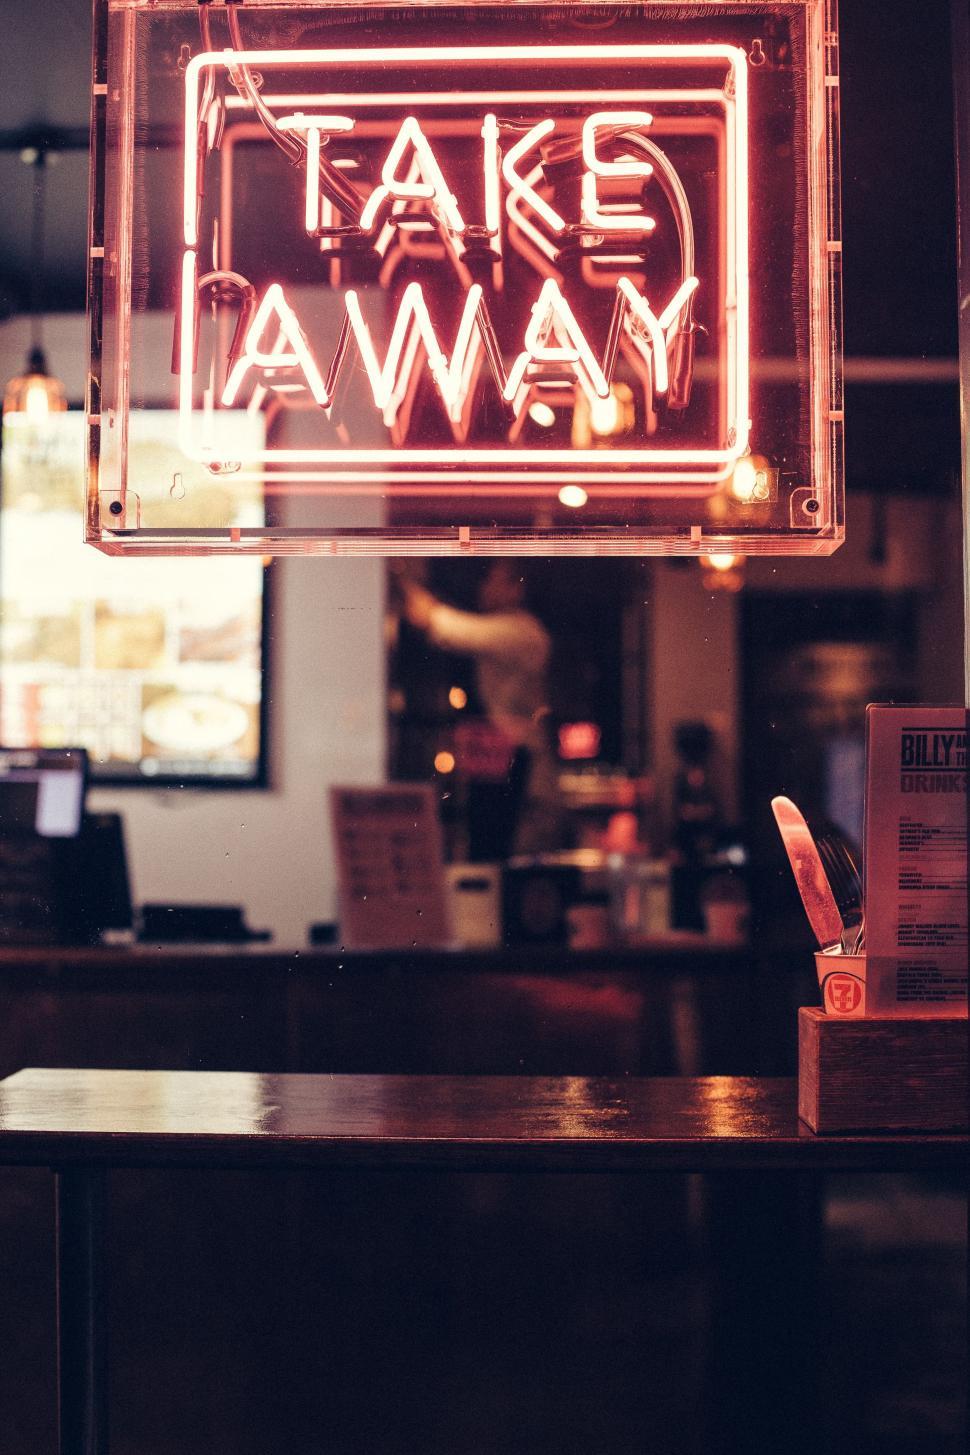 Free Image of Neon Sign Saying Take Away Hanging From Ceiling 